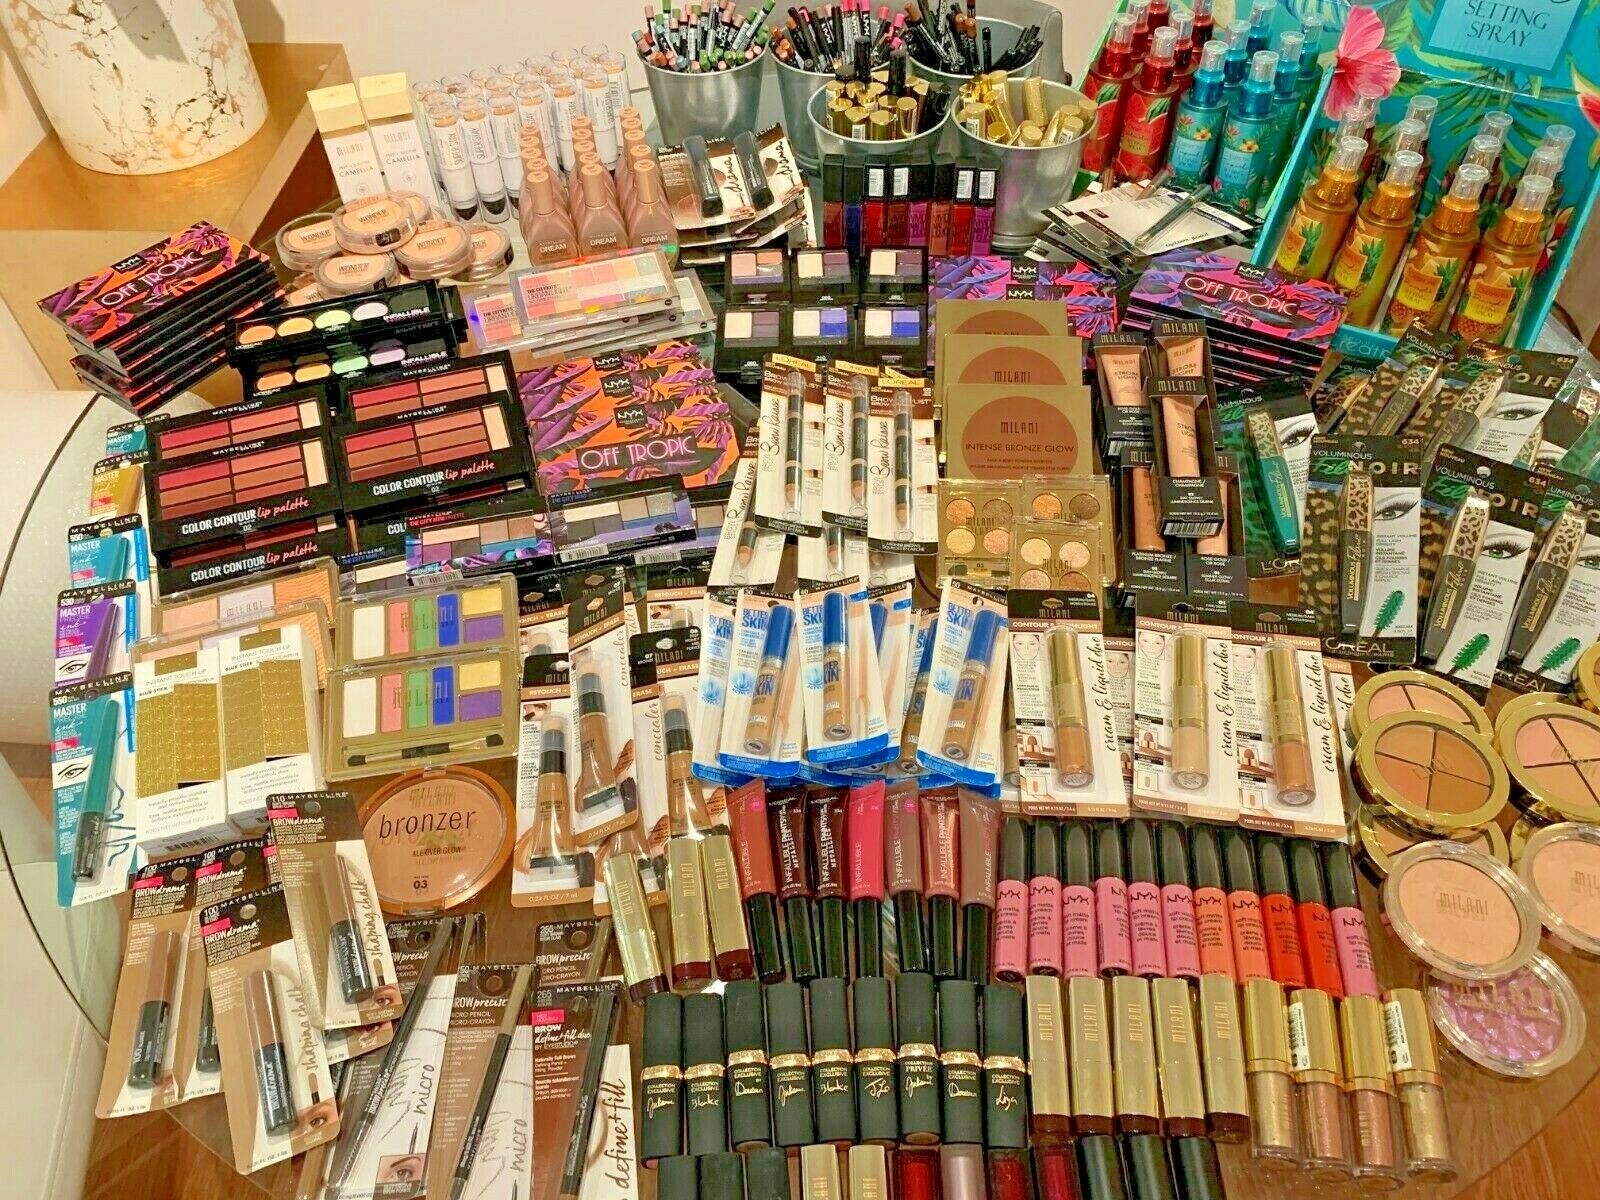 10 Unit Lot L'oréal Maybelline Nyx Milani Beauty Make-up Cosmetic Free Shipping